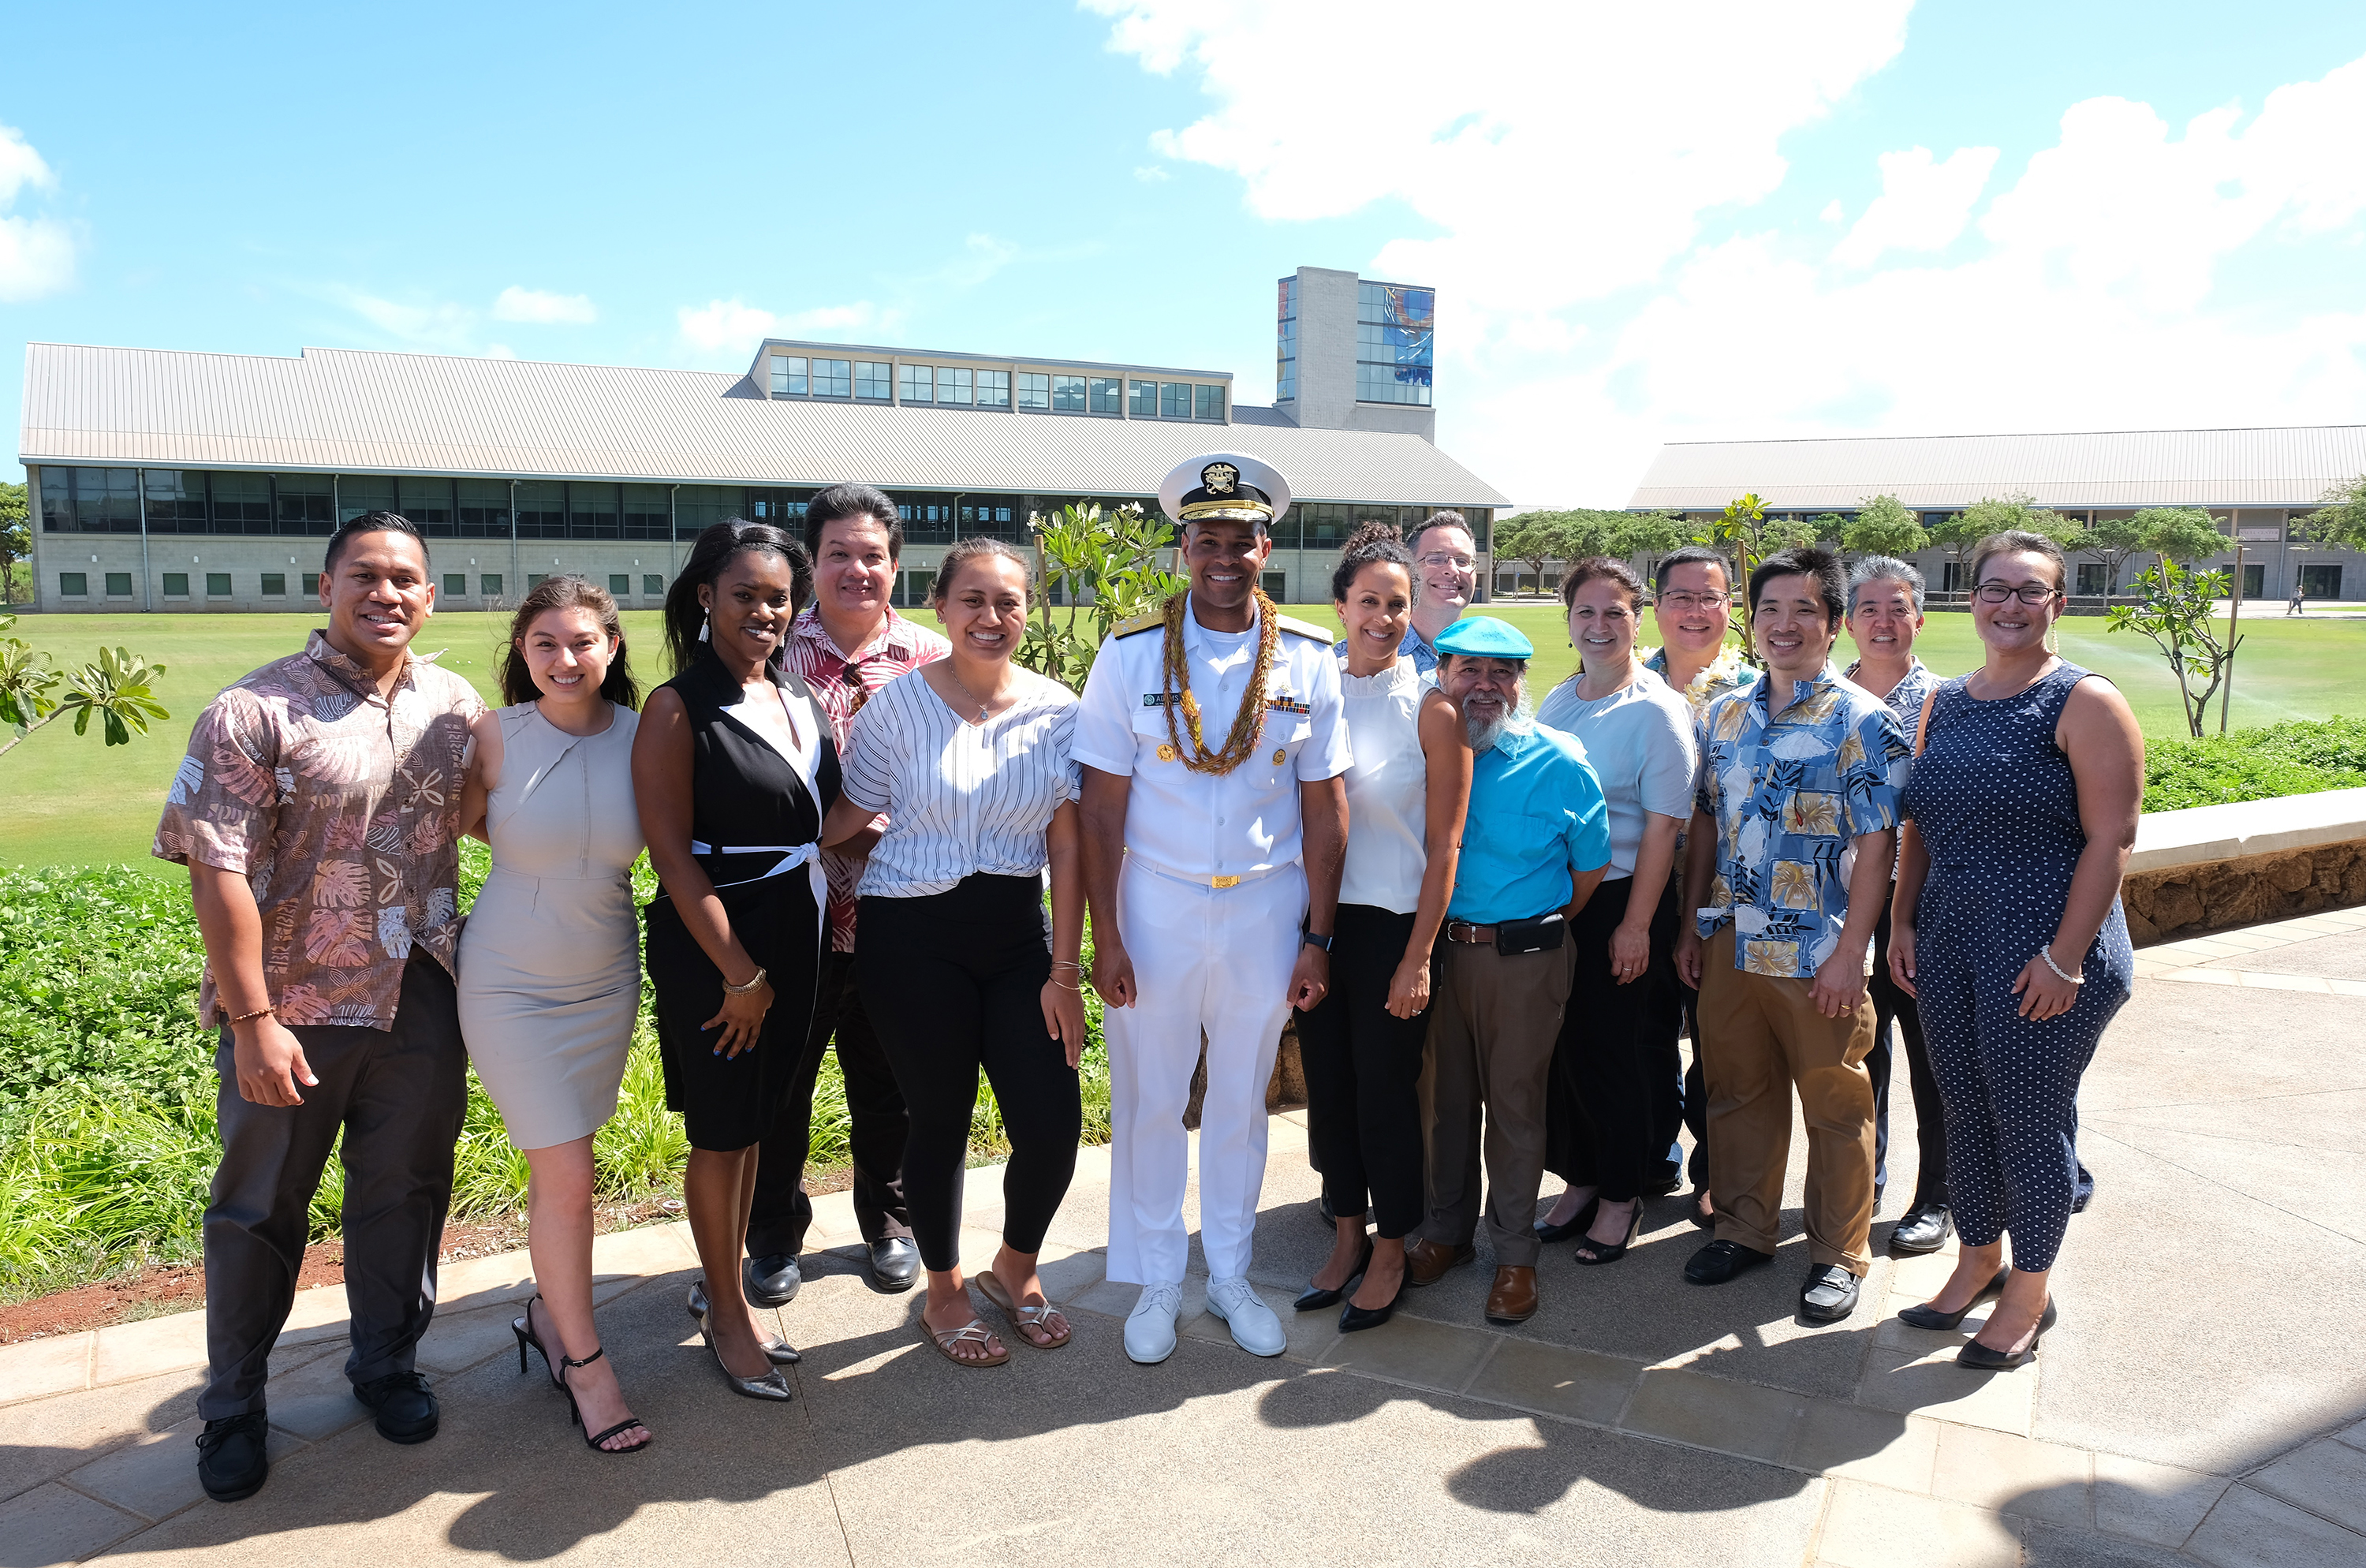 Photo of a group of people with a man in a white uniform standing at center. In the background is the UH West Oahu Great Lawn and the James & Abigail Campbell Library